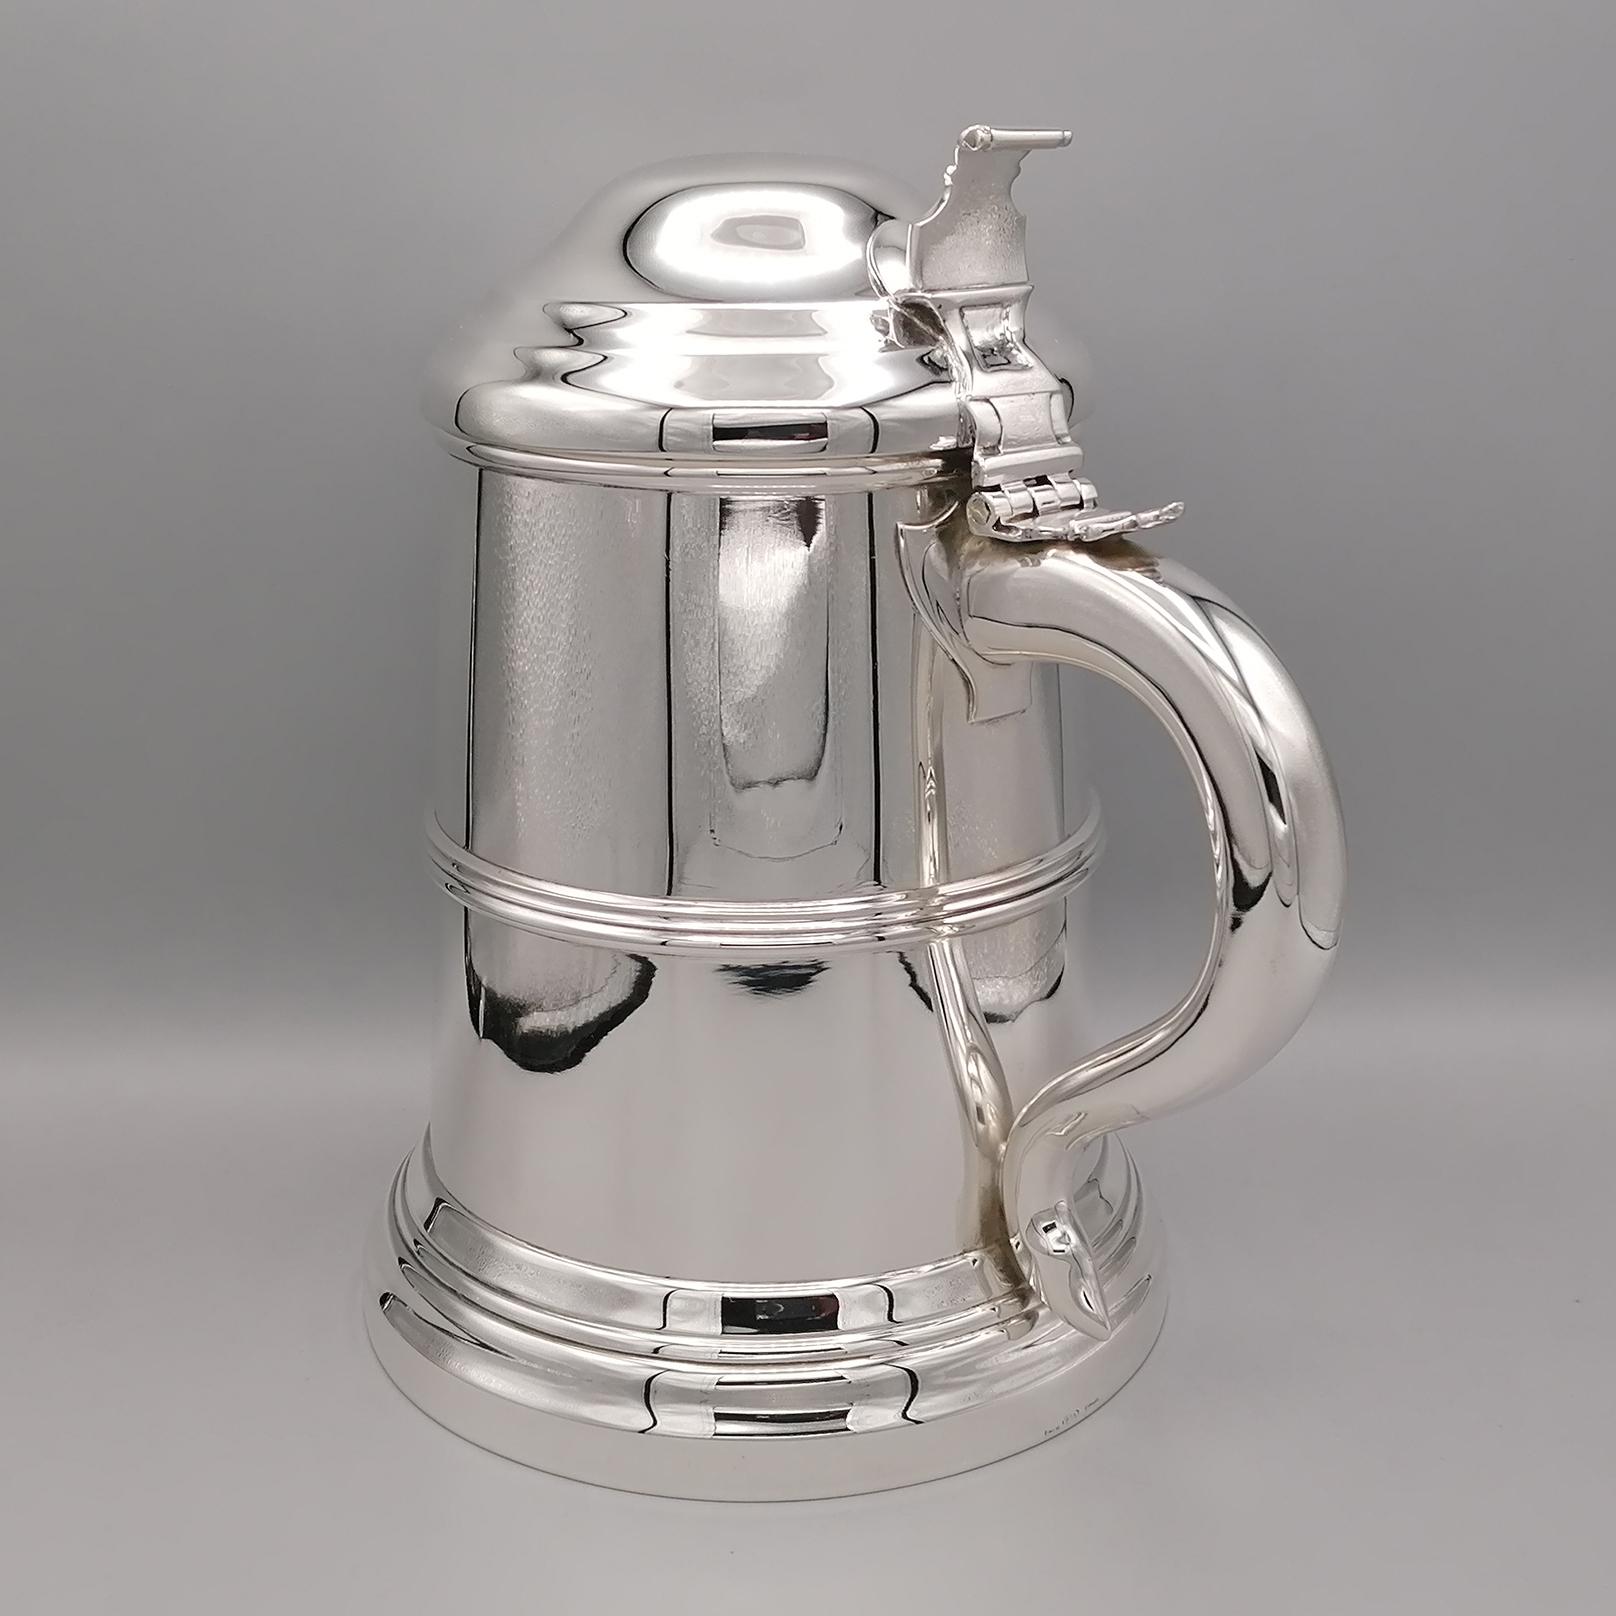 Sterling silver lidded big and heavy tankard in a George I style, having a plain straight-sided body with an applied reeded band, a hinged dome lid with thumb-piece, a scroll handle, and sitting on a reeded collet foot.
Italian silverware, already